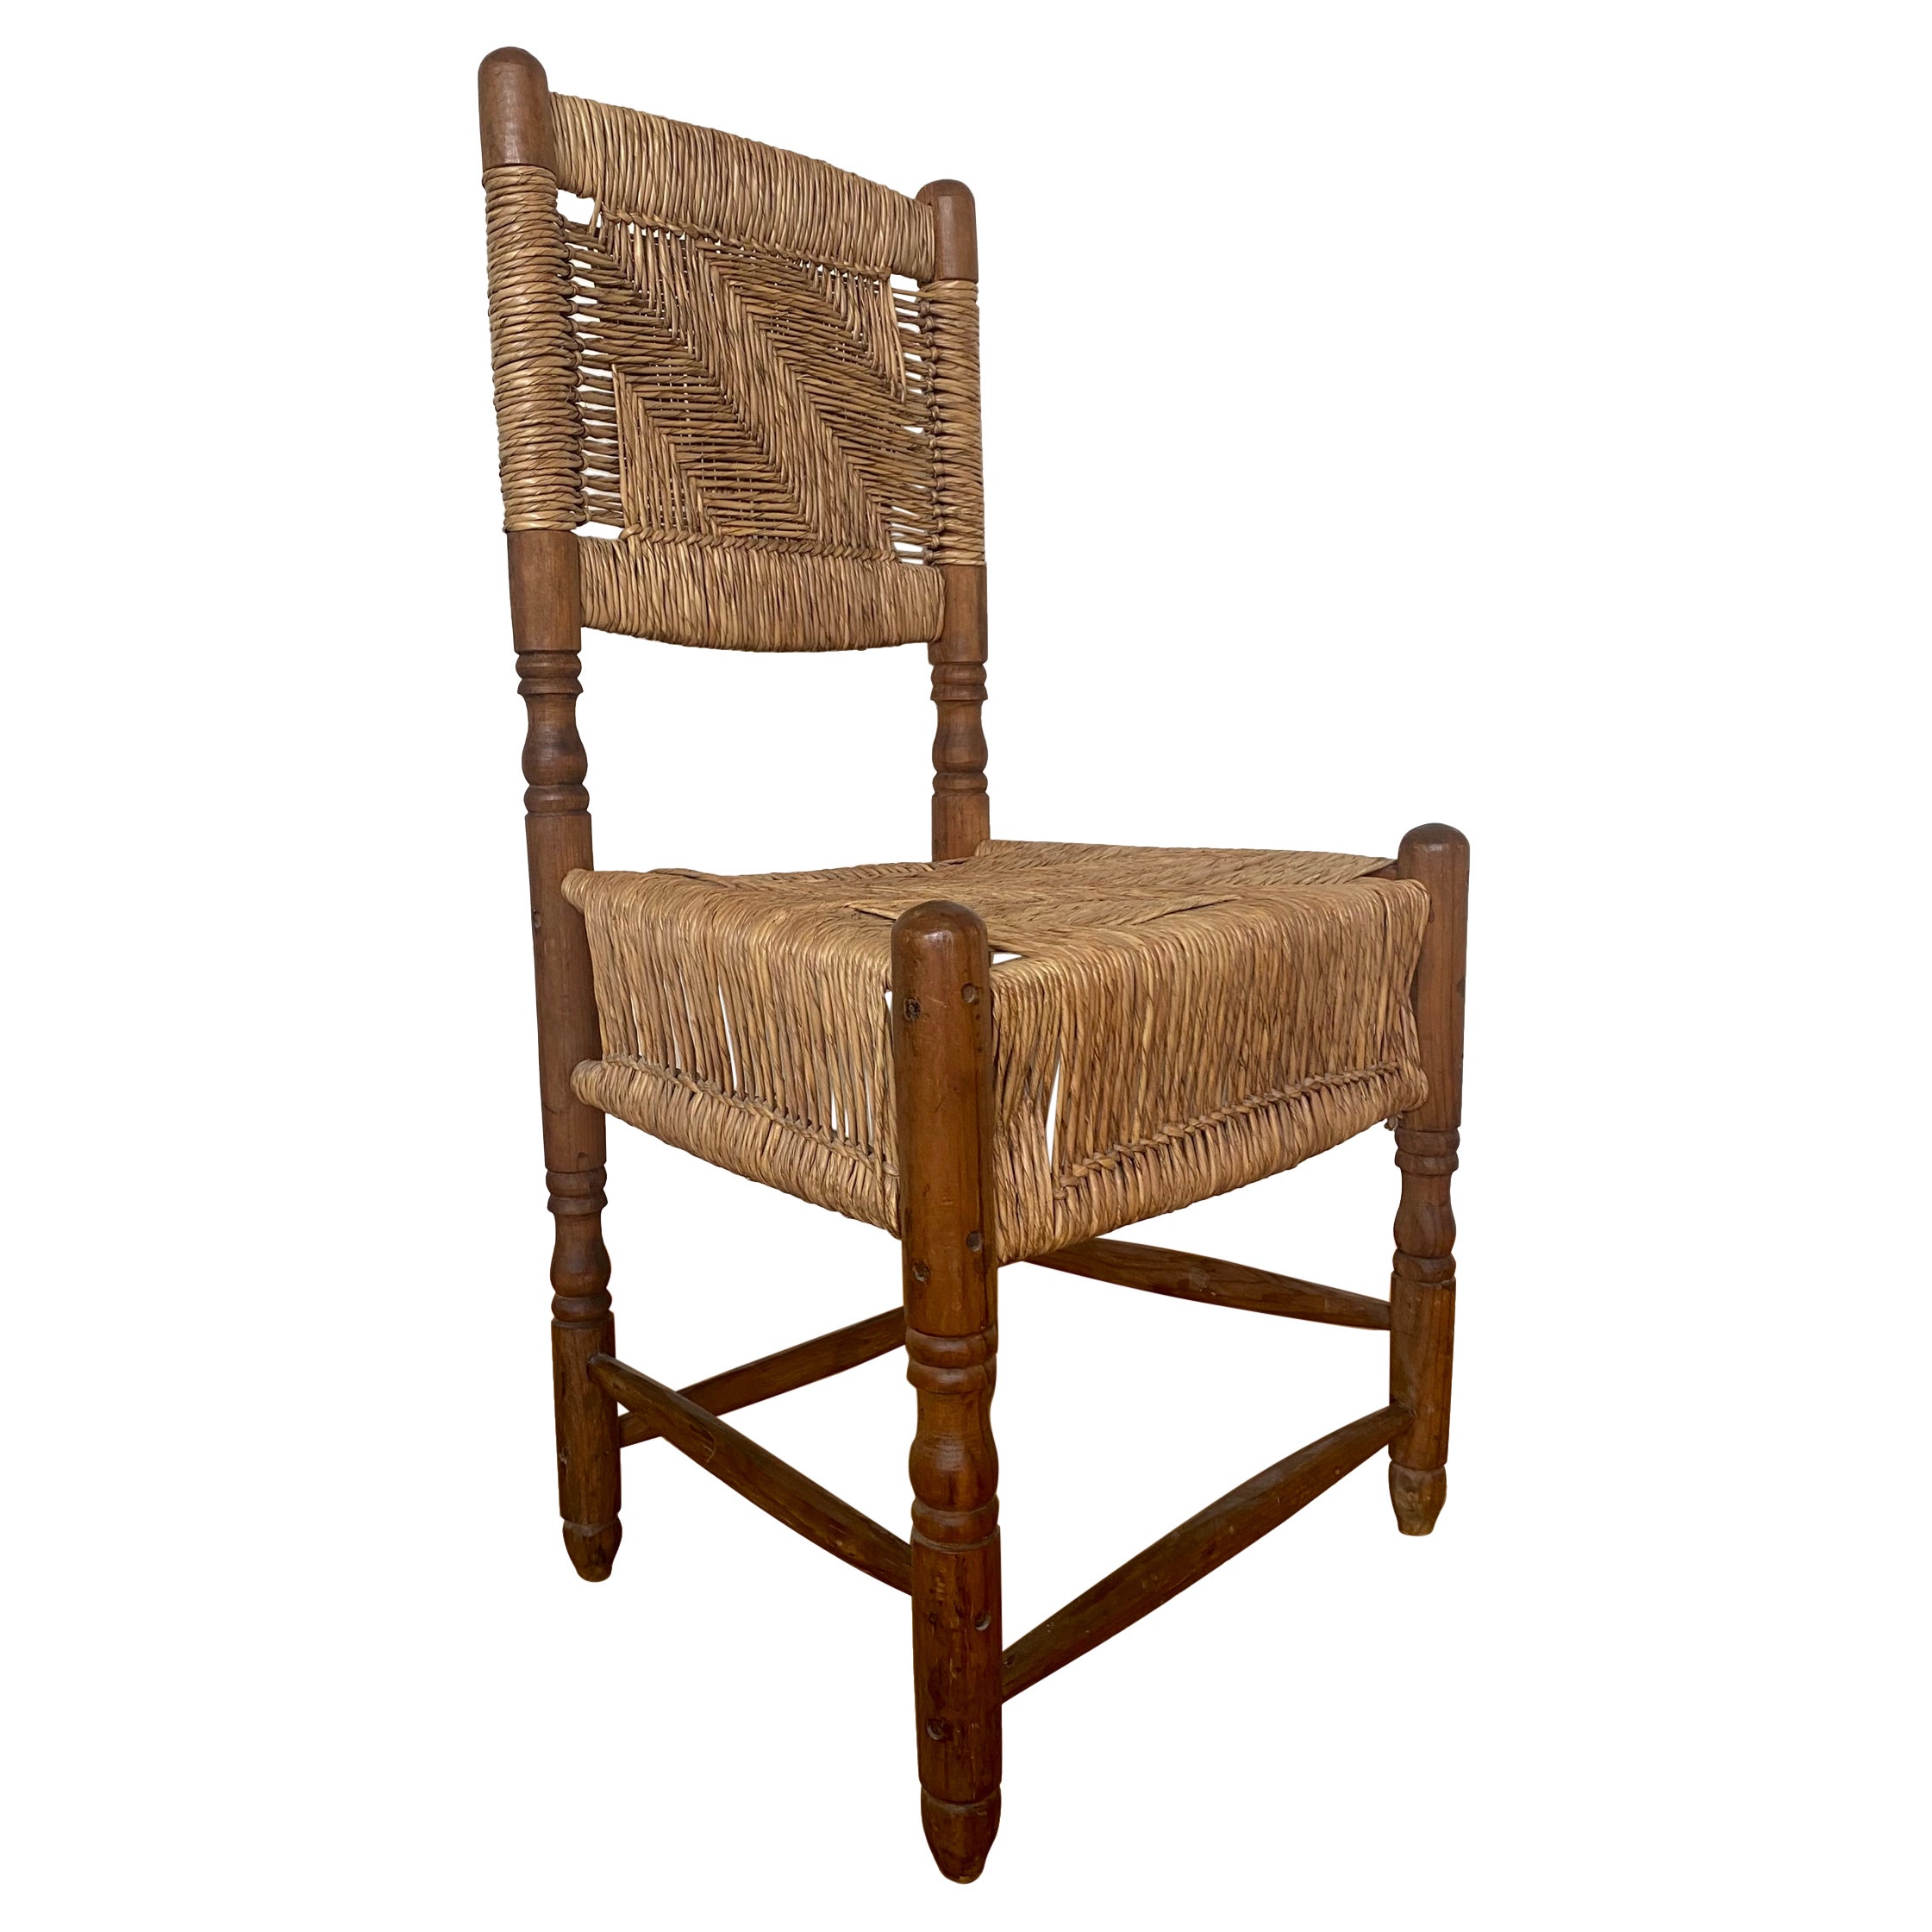 North American Rustic, Vintage, Wooden Chair with Woven Seat